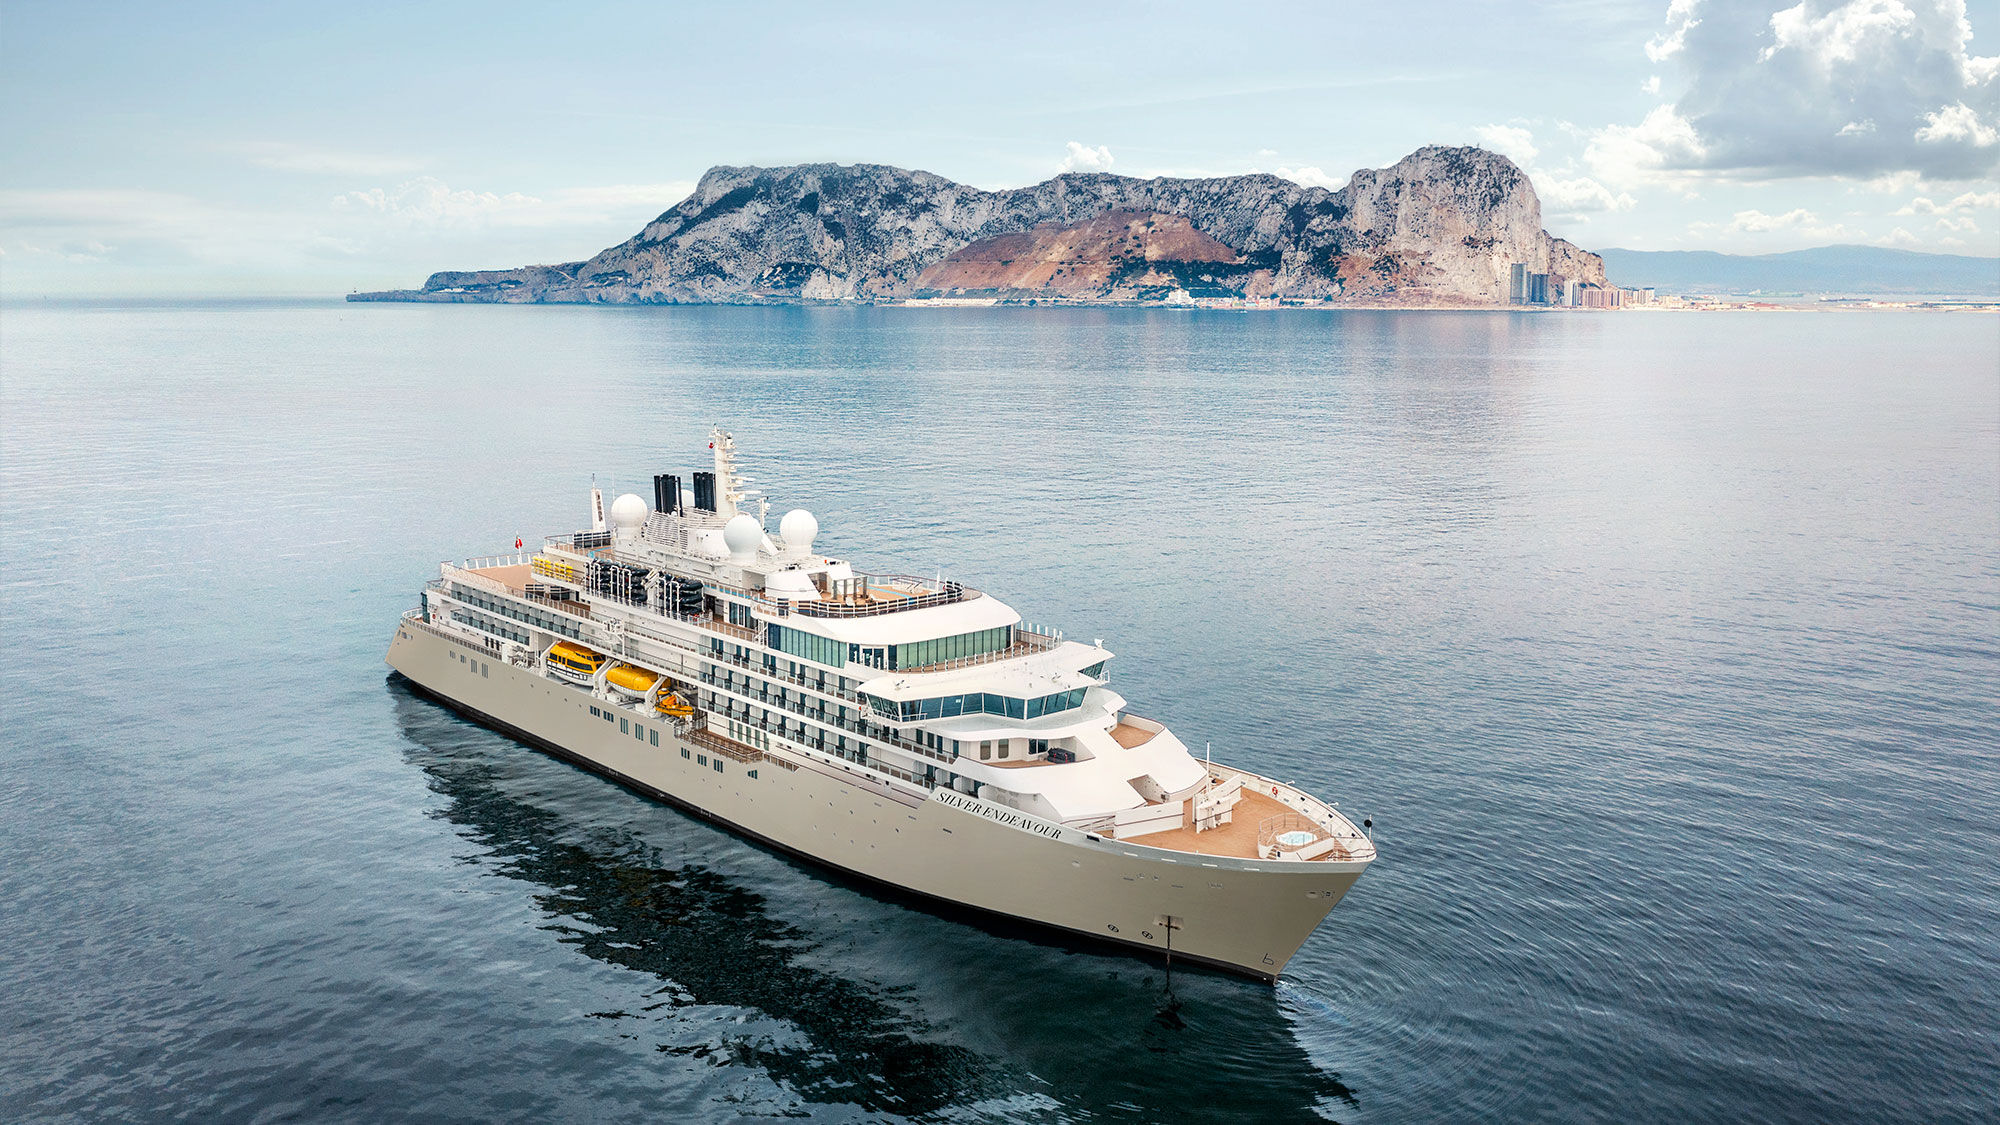 The 200-passenger Silver Endeavour, a former Crystal ship, is undergoing renovations, including the introduction of new suite categories.